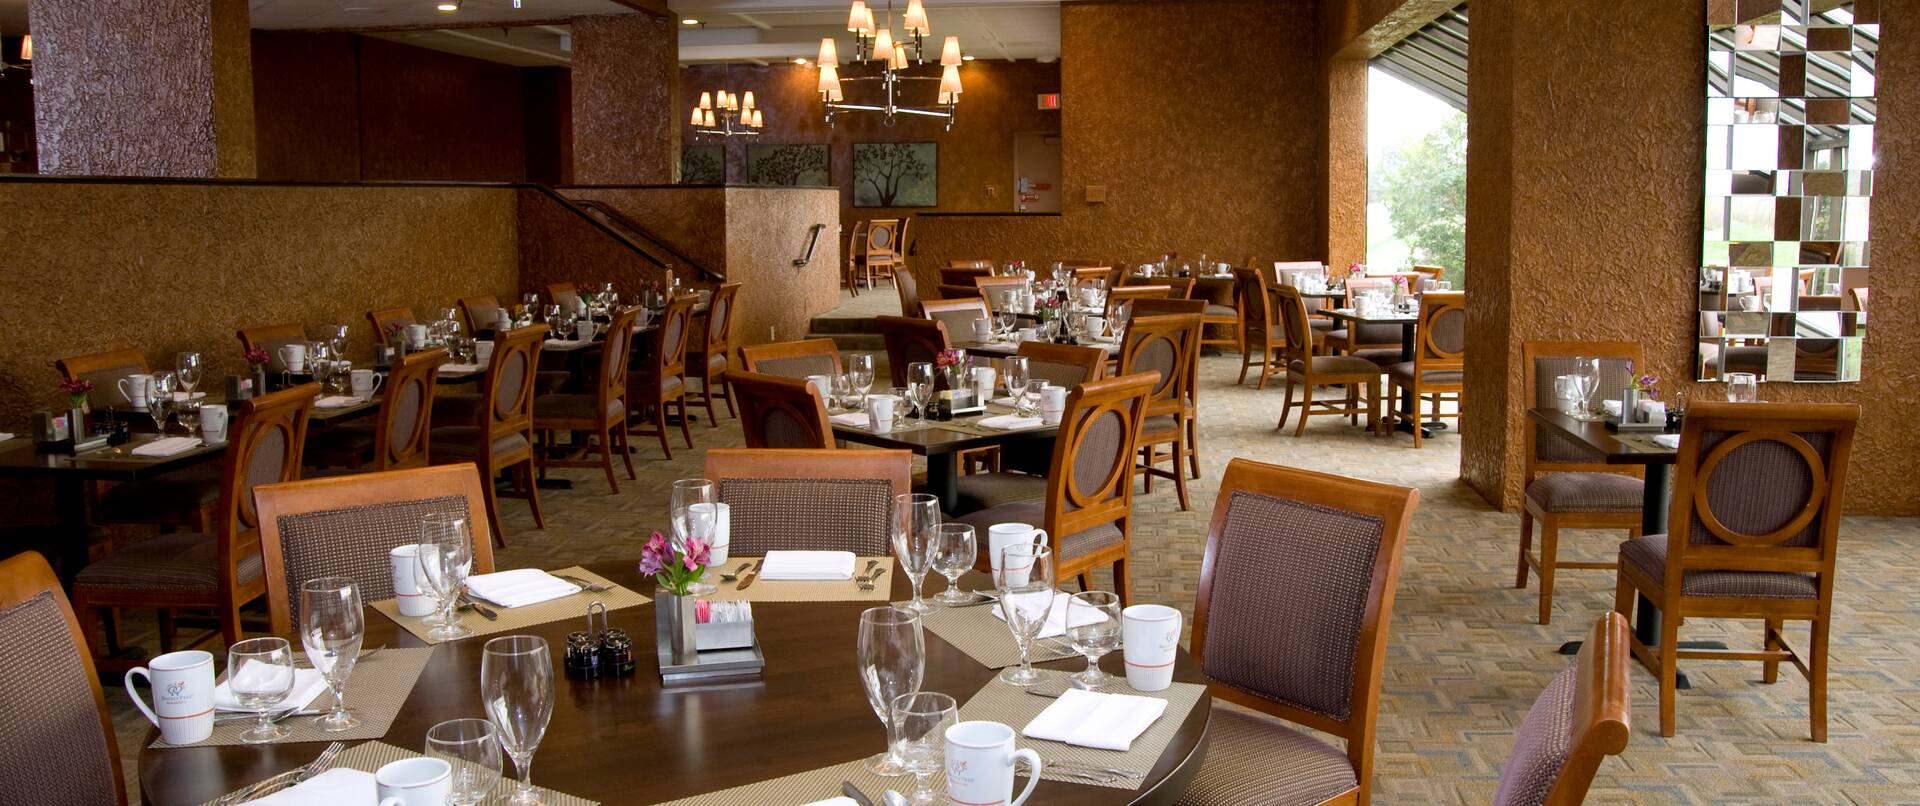 Copperfields Restaurant Dining Room Tables